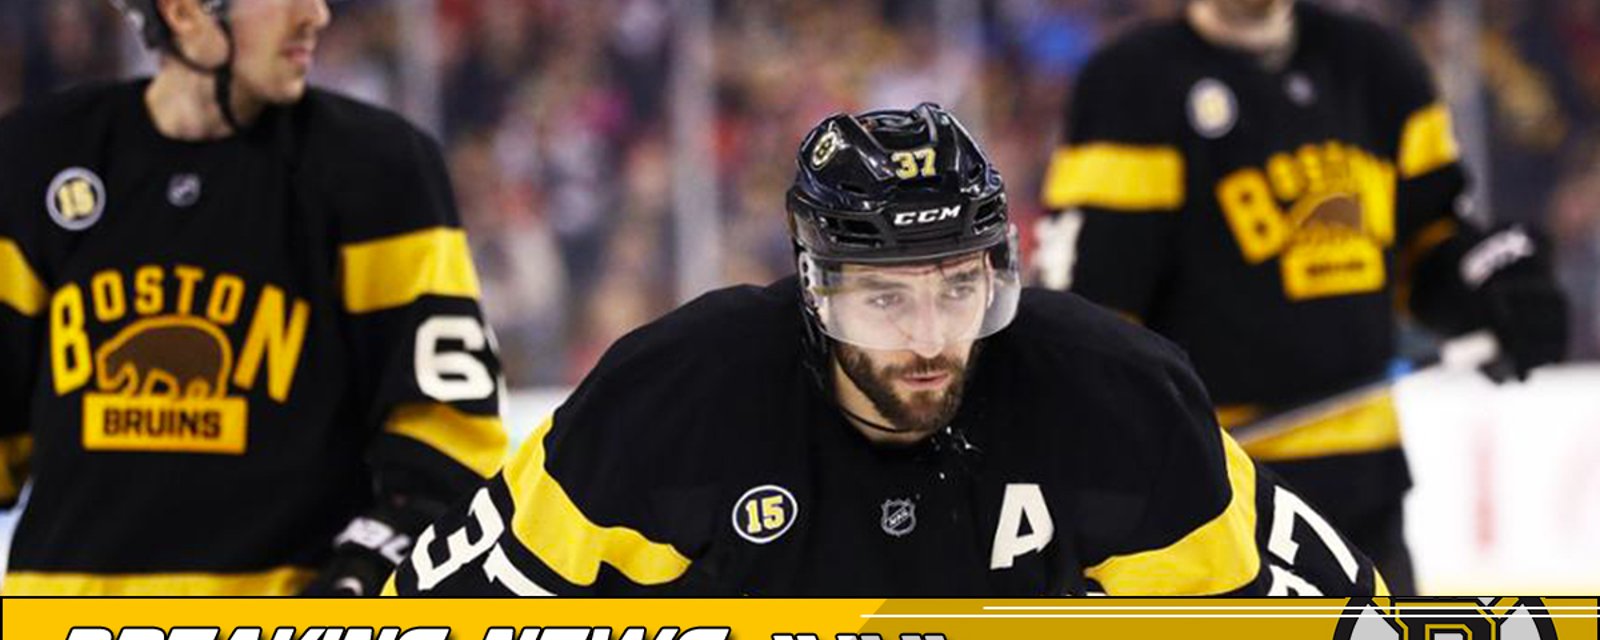 Breaking: Bad news for the Bruins